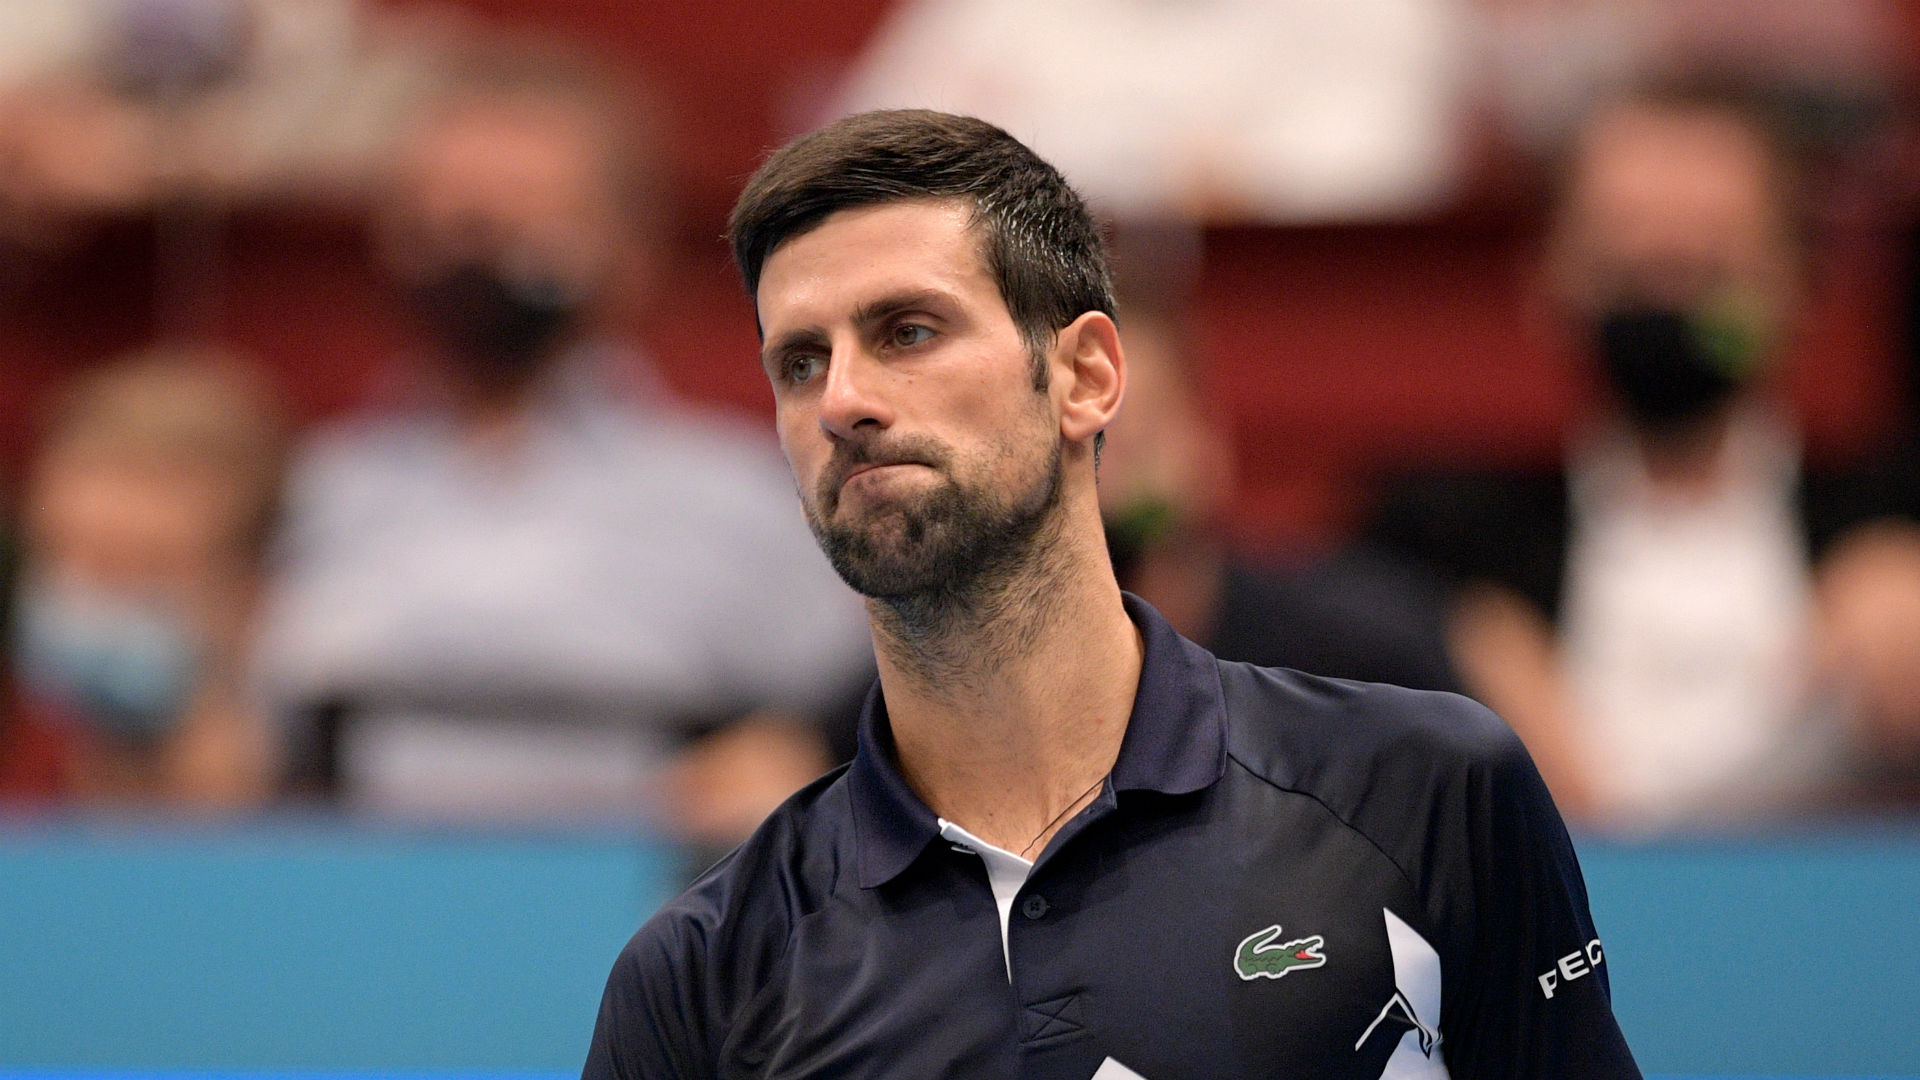 Novak Djokovic was knocked out in the quarter-finals of the Vienna Open after winning just three games in a 6-2 6-1 loss to Lorenzo Sonego.